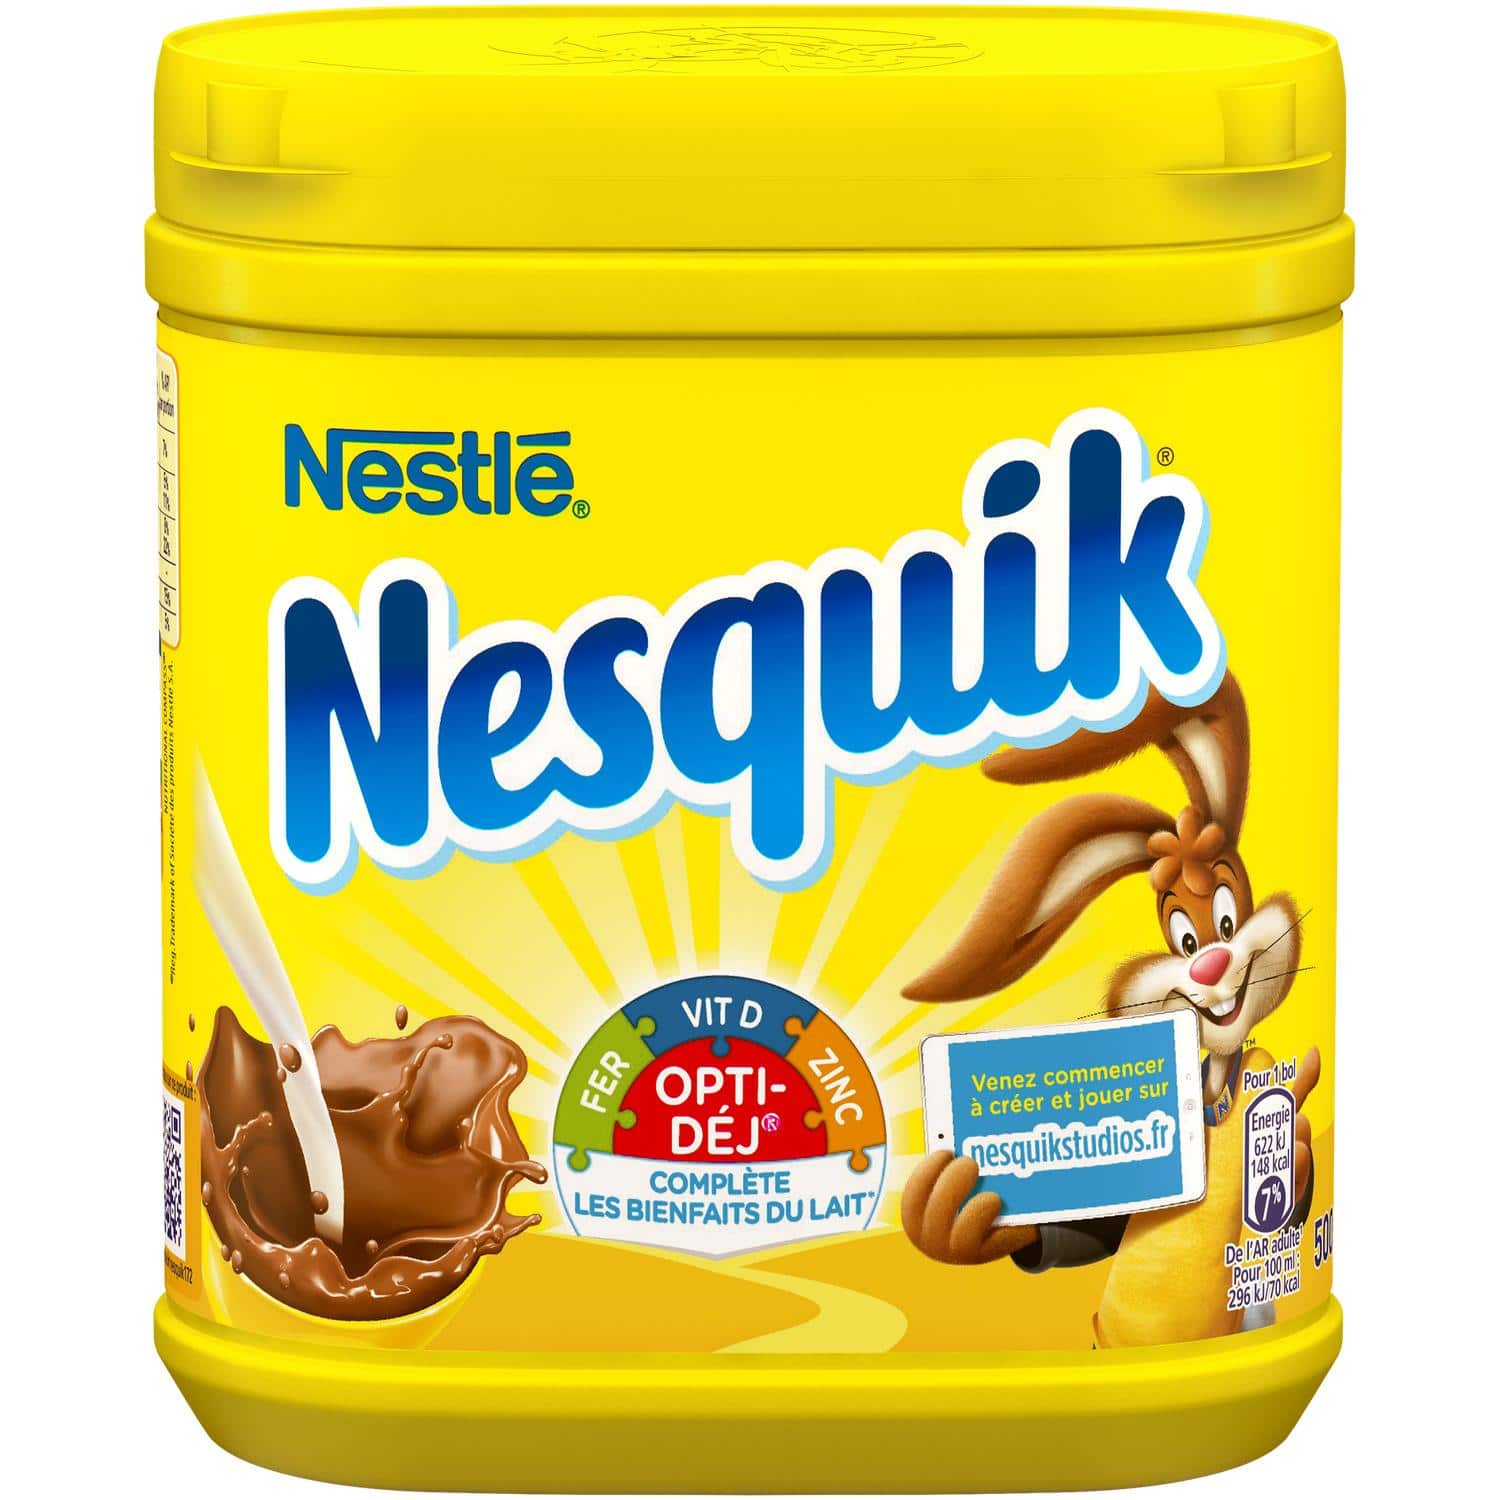 https://my-french-grocery.com/wp-content/uploads/2018/08/nesquick-500.jpg